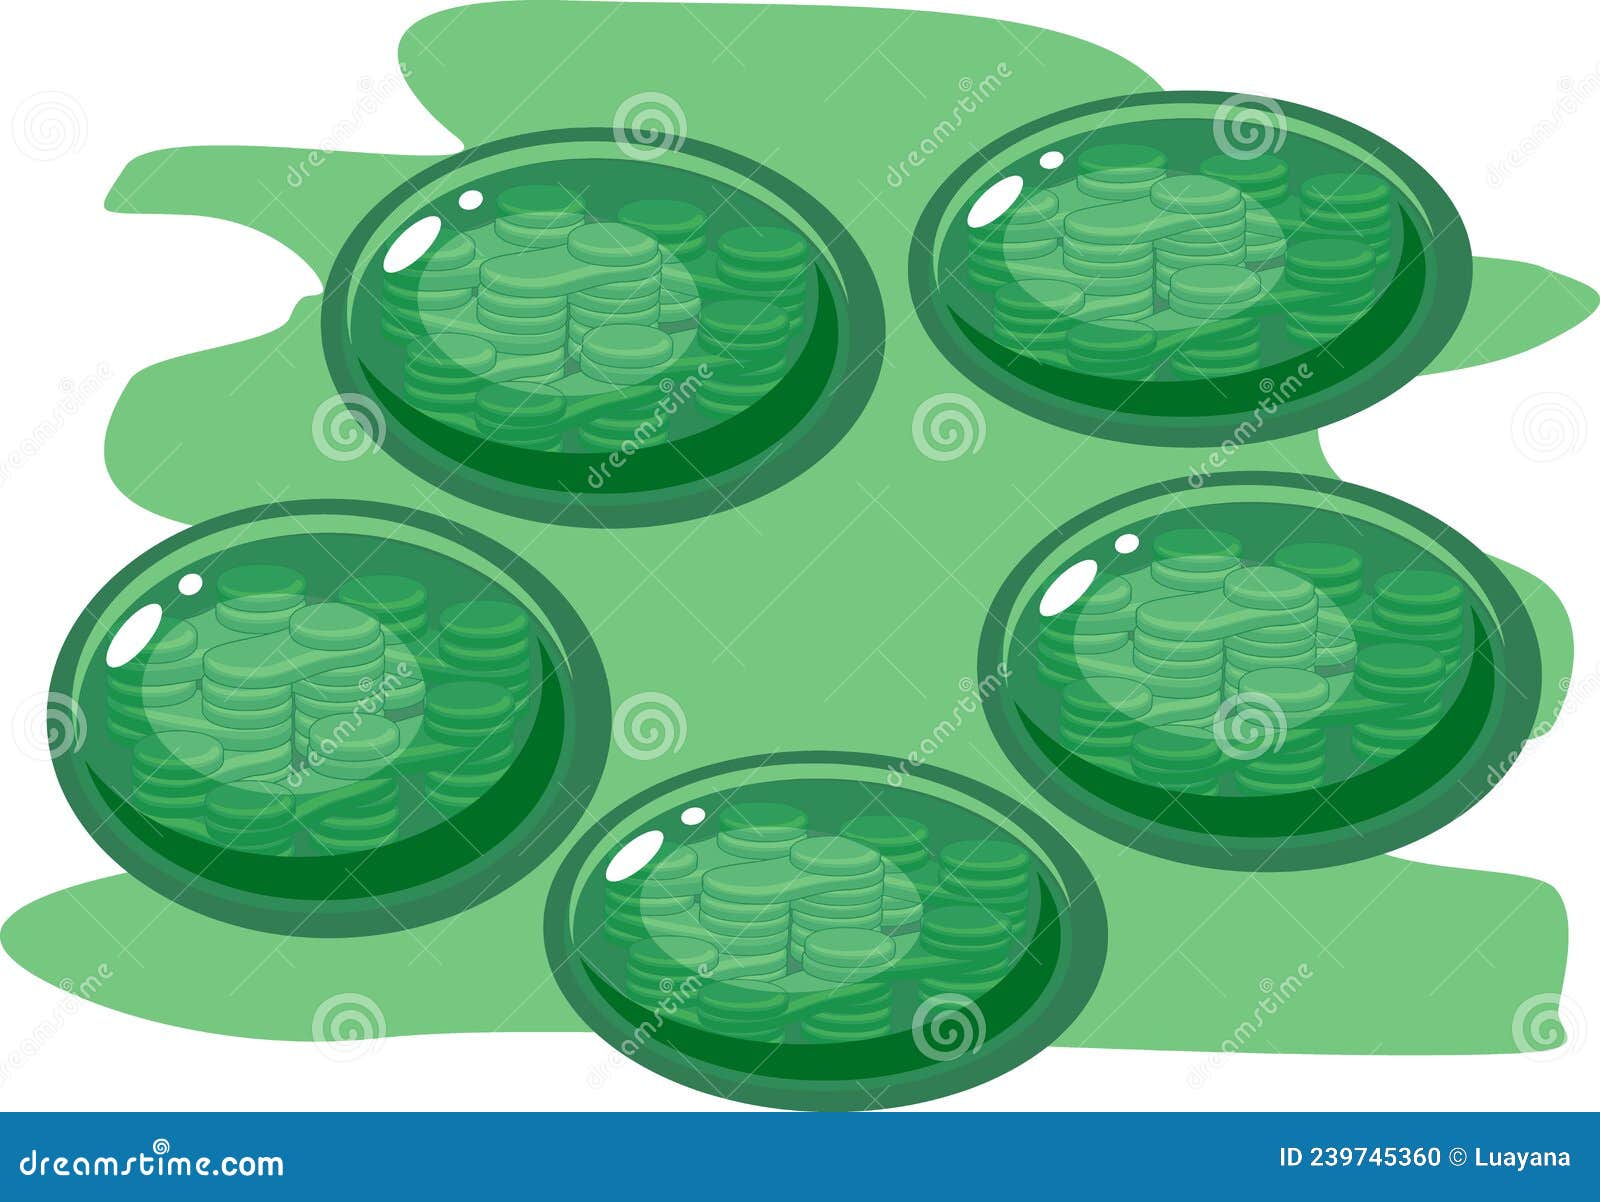 group of chloroplasts